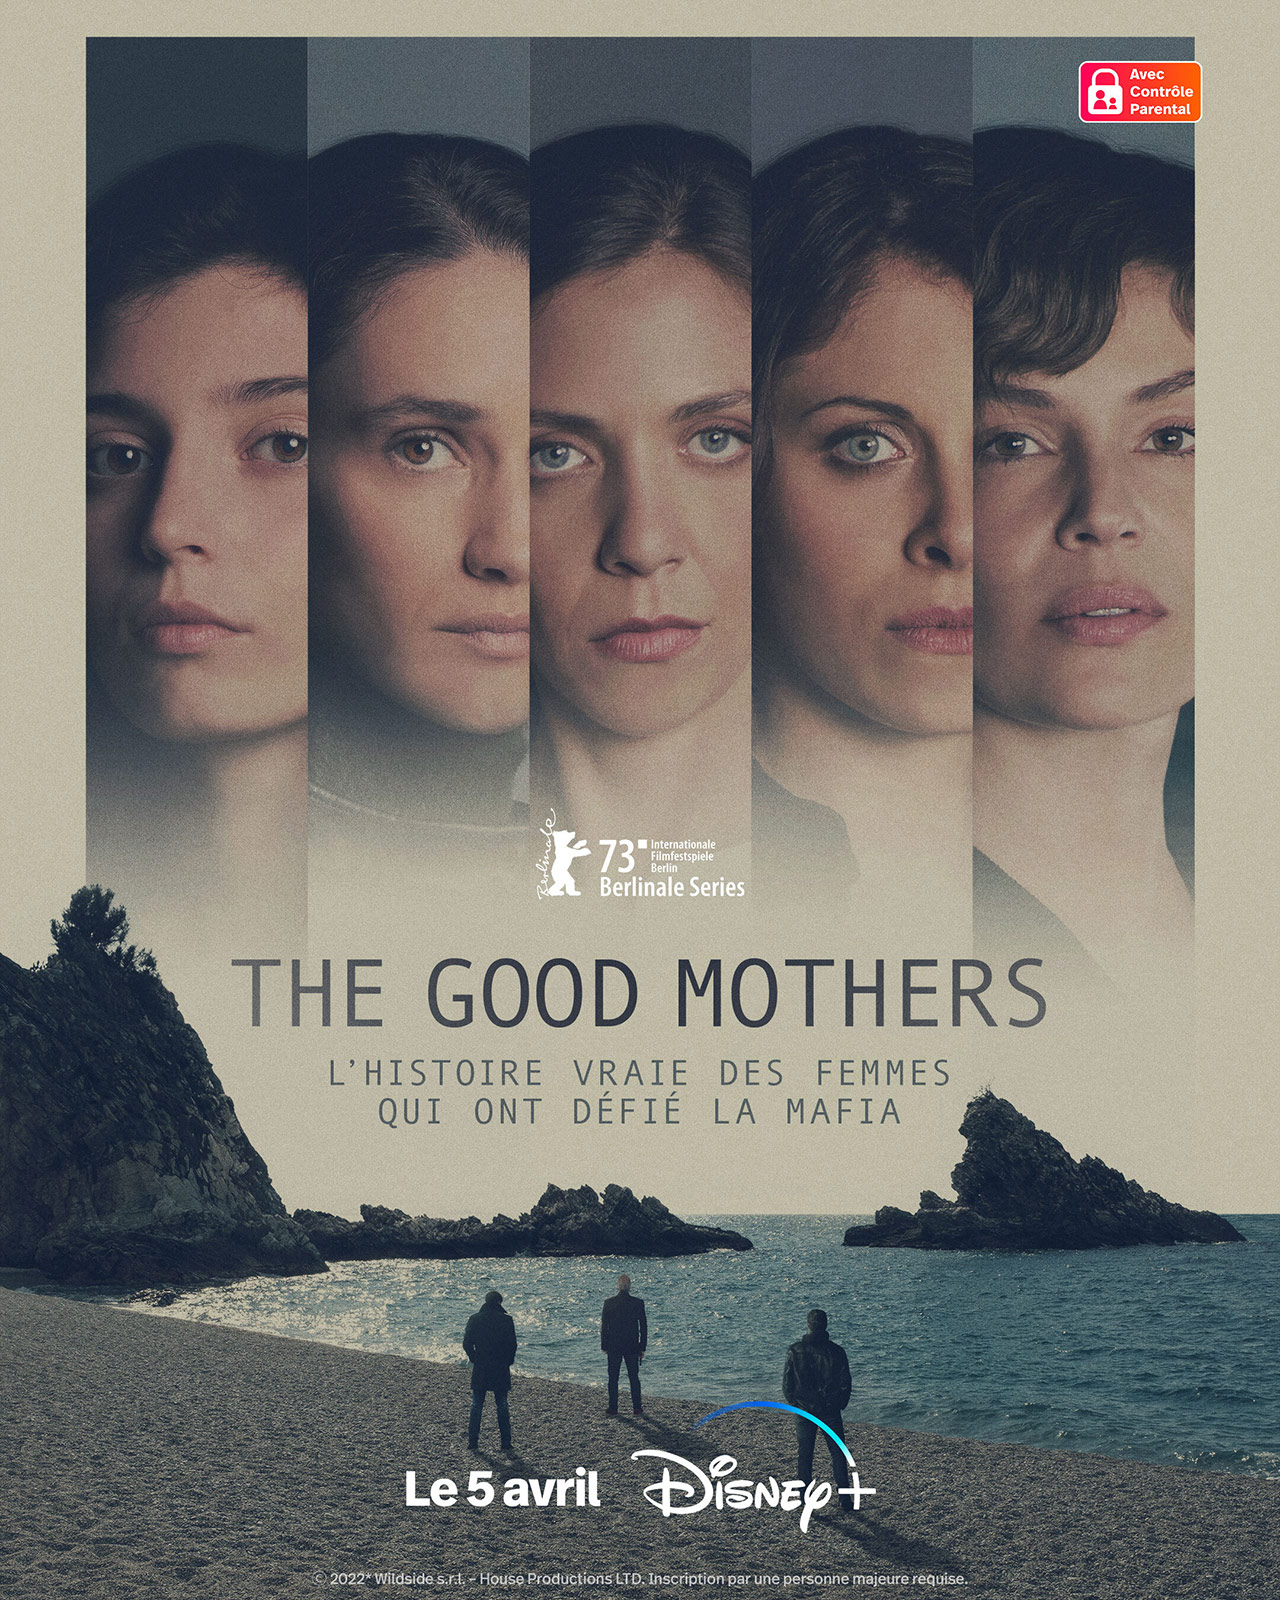 The Good Mothers - Série TV 2023 streaming VF gratuit complet